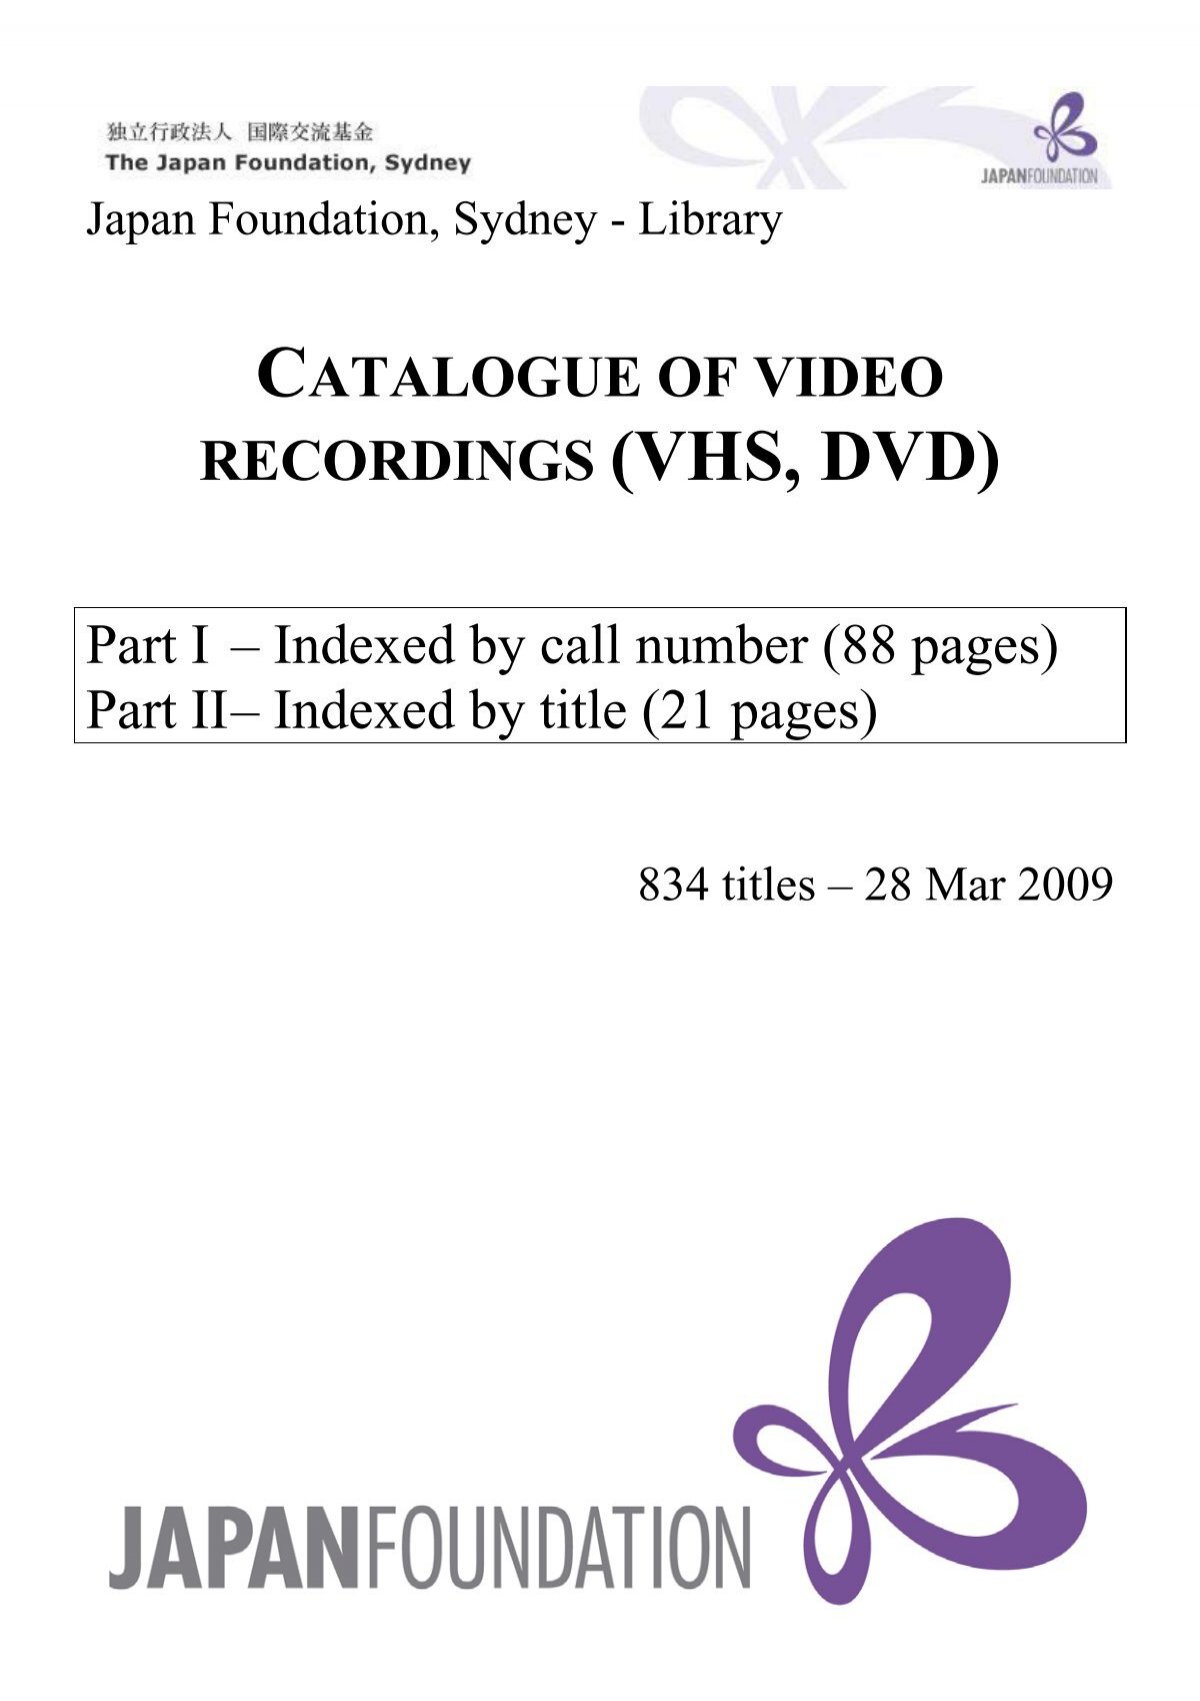 Video Recording collection - The Japan Foundation